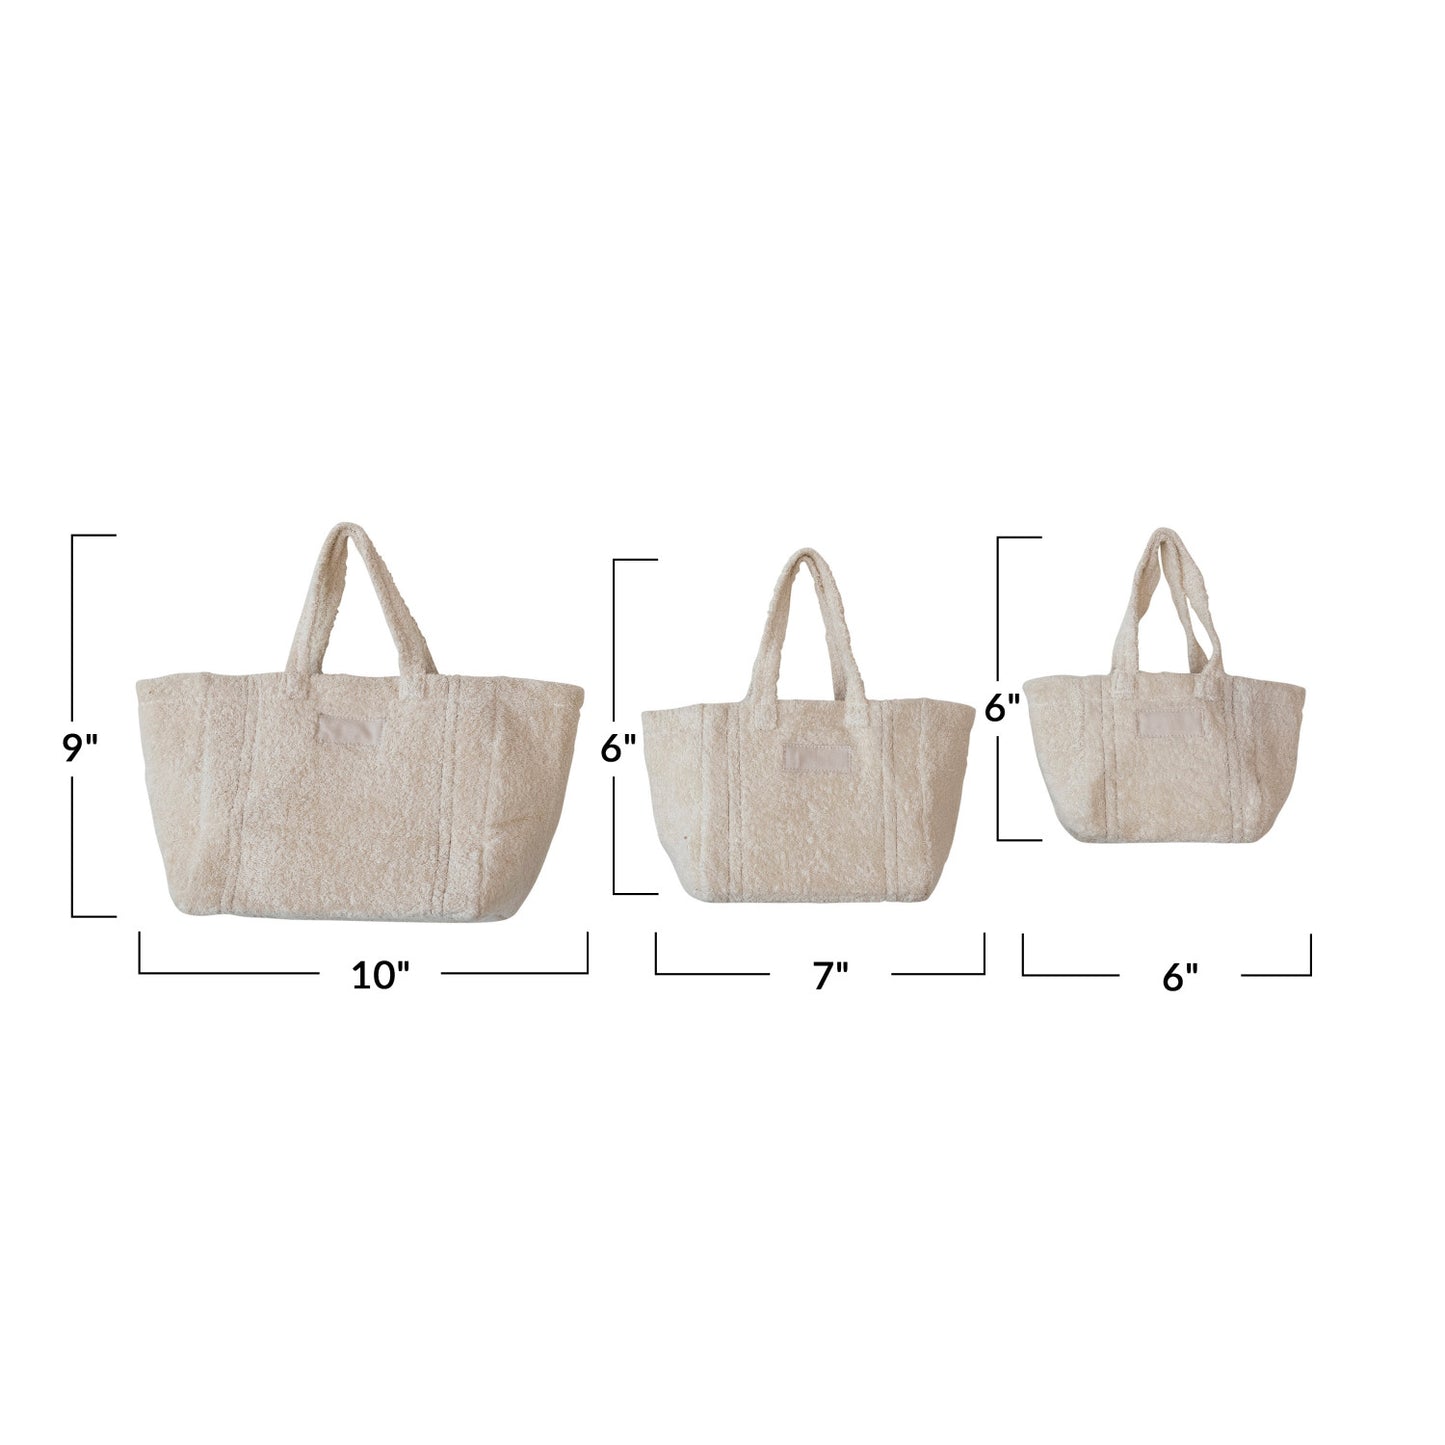 LARGE COTTON TERRY TOTE BAG